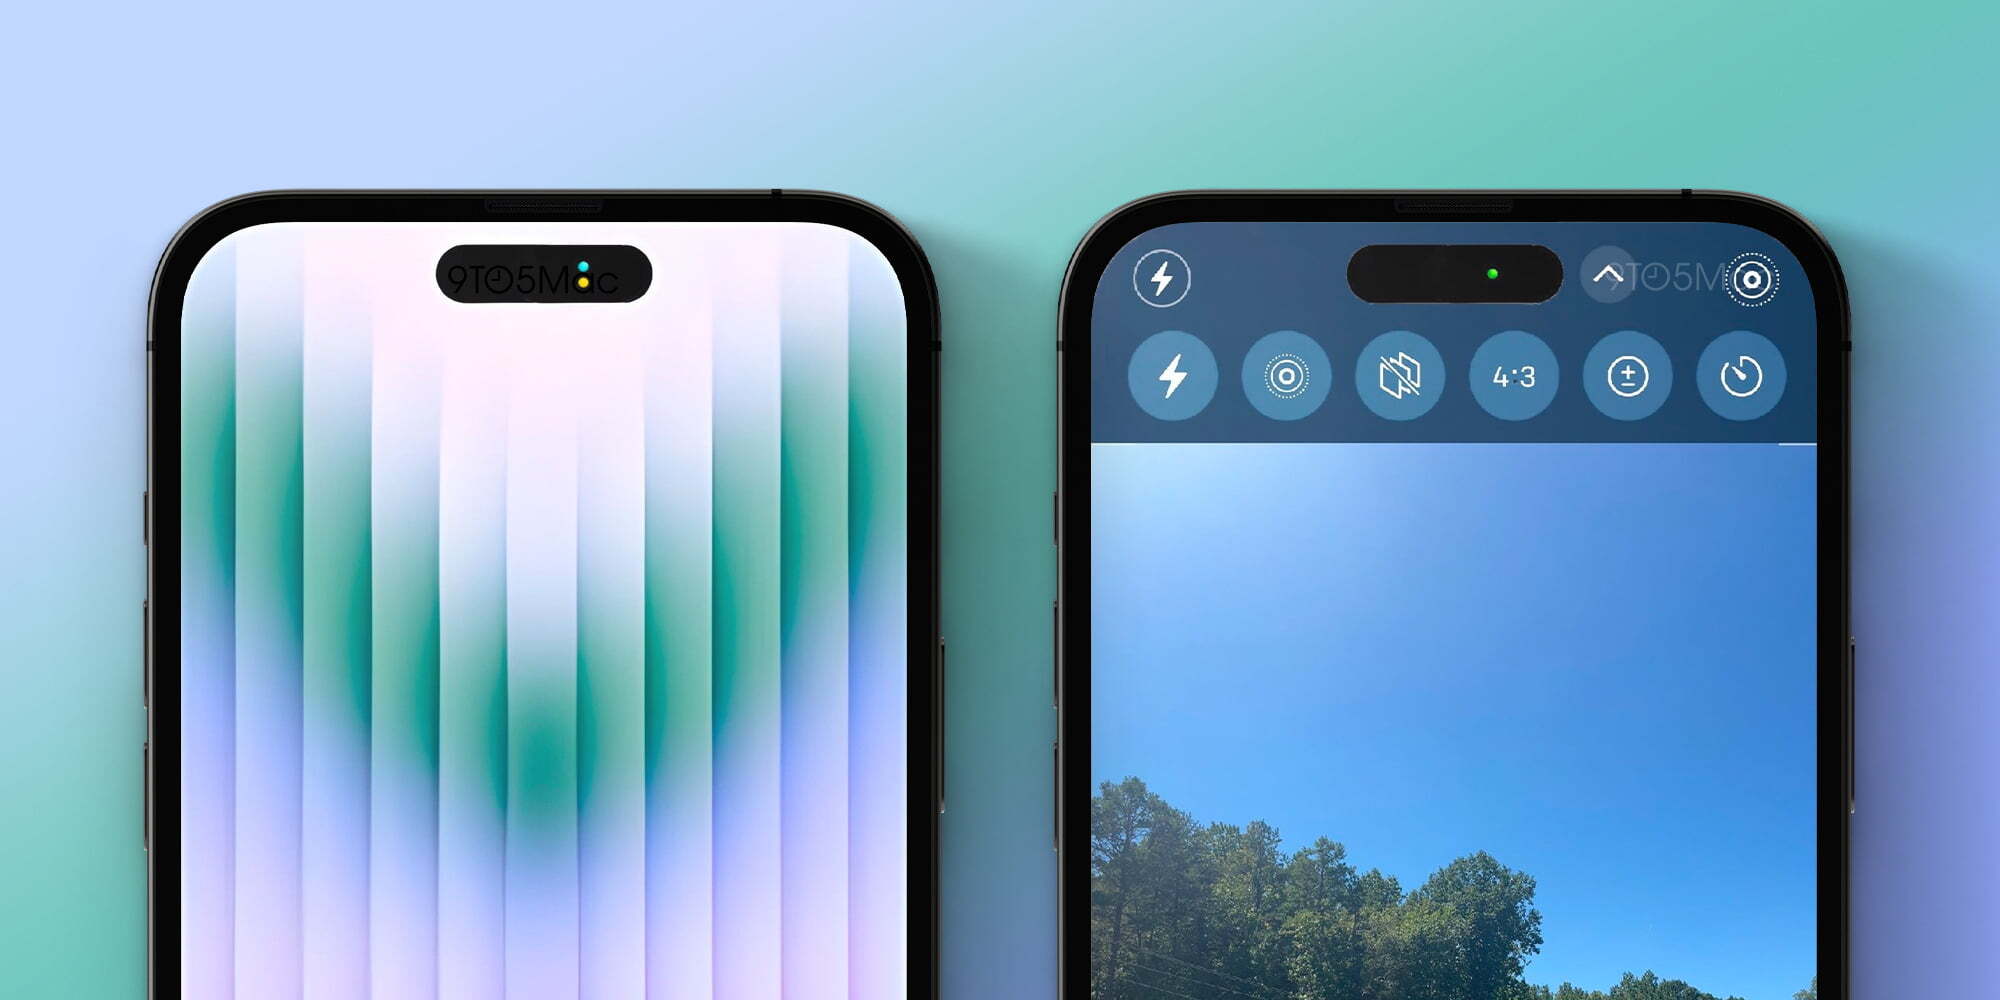 Insider: Apple will connect the iPhone 14 Pro and iPhone 14 Pro Max notches with software and include privacy indicators, camera and Face ID sensors